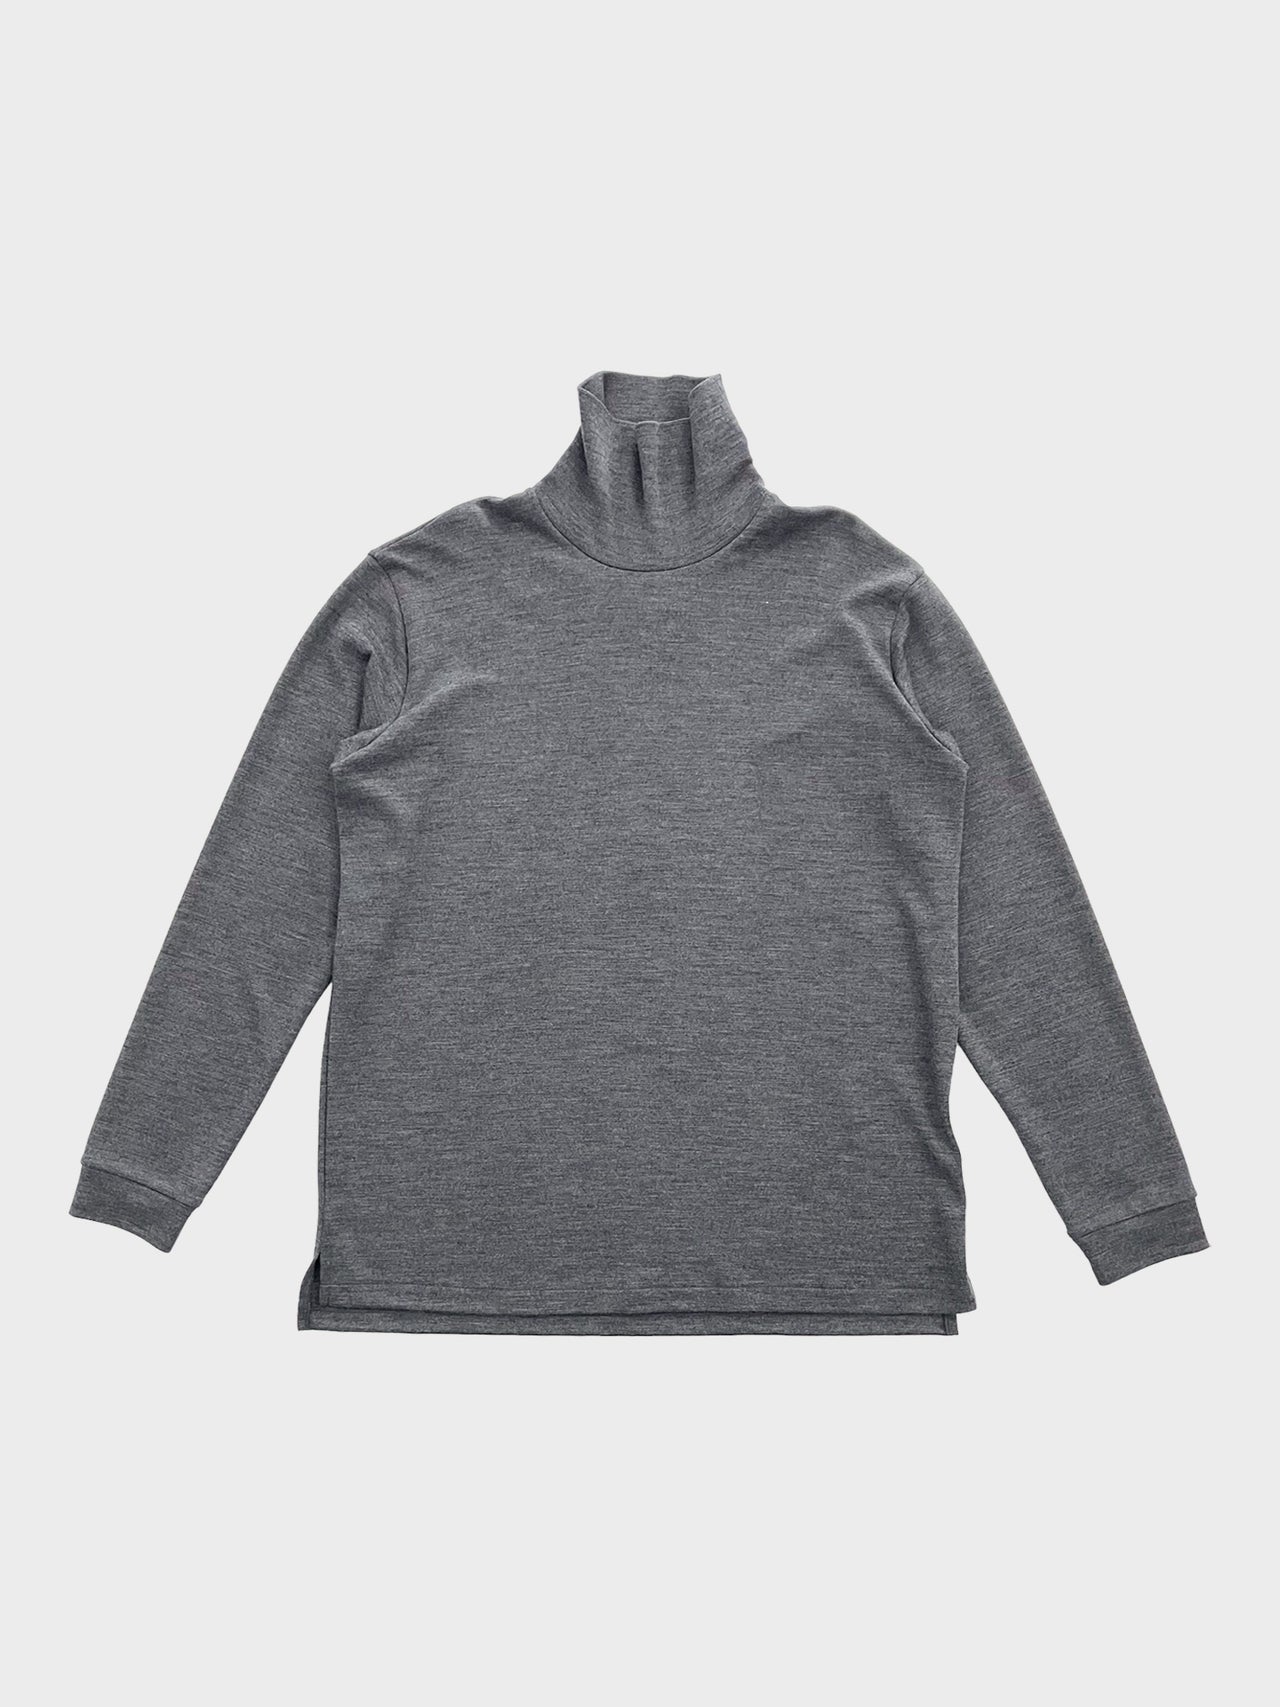 WEWILL /  TURTLE NECK T-SHIRT (GRAY)